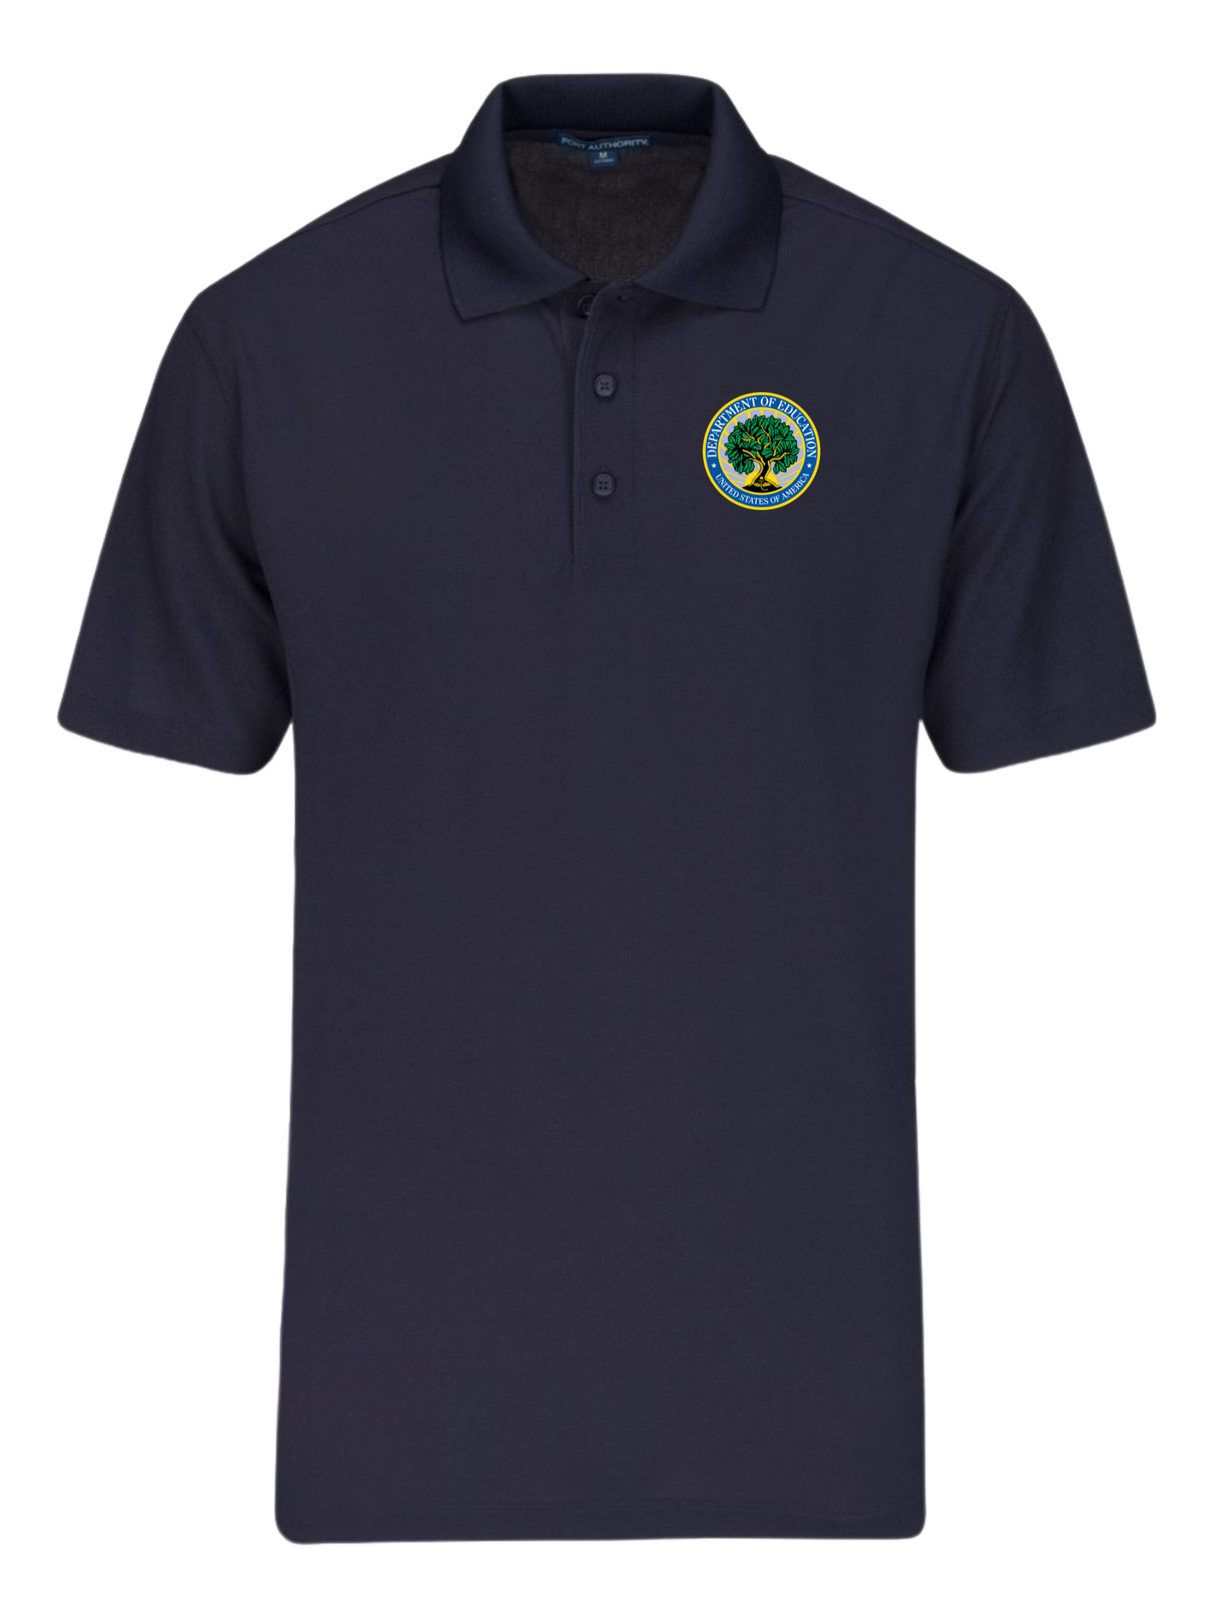 US Department of Education Polo Shirt - Men's Short Sleeve - FEDS Apparel